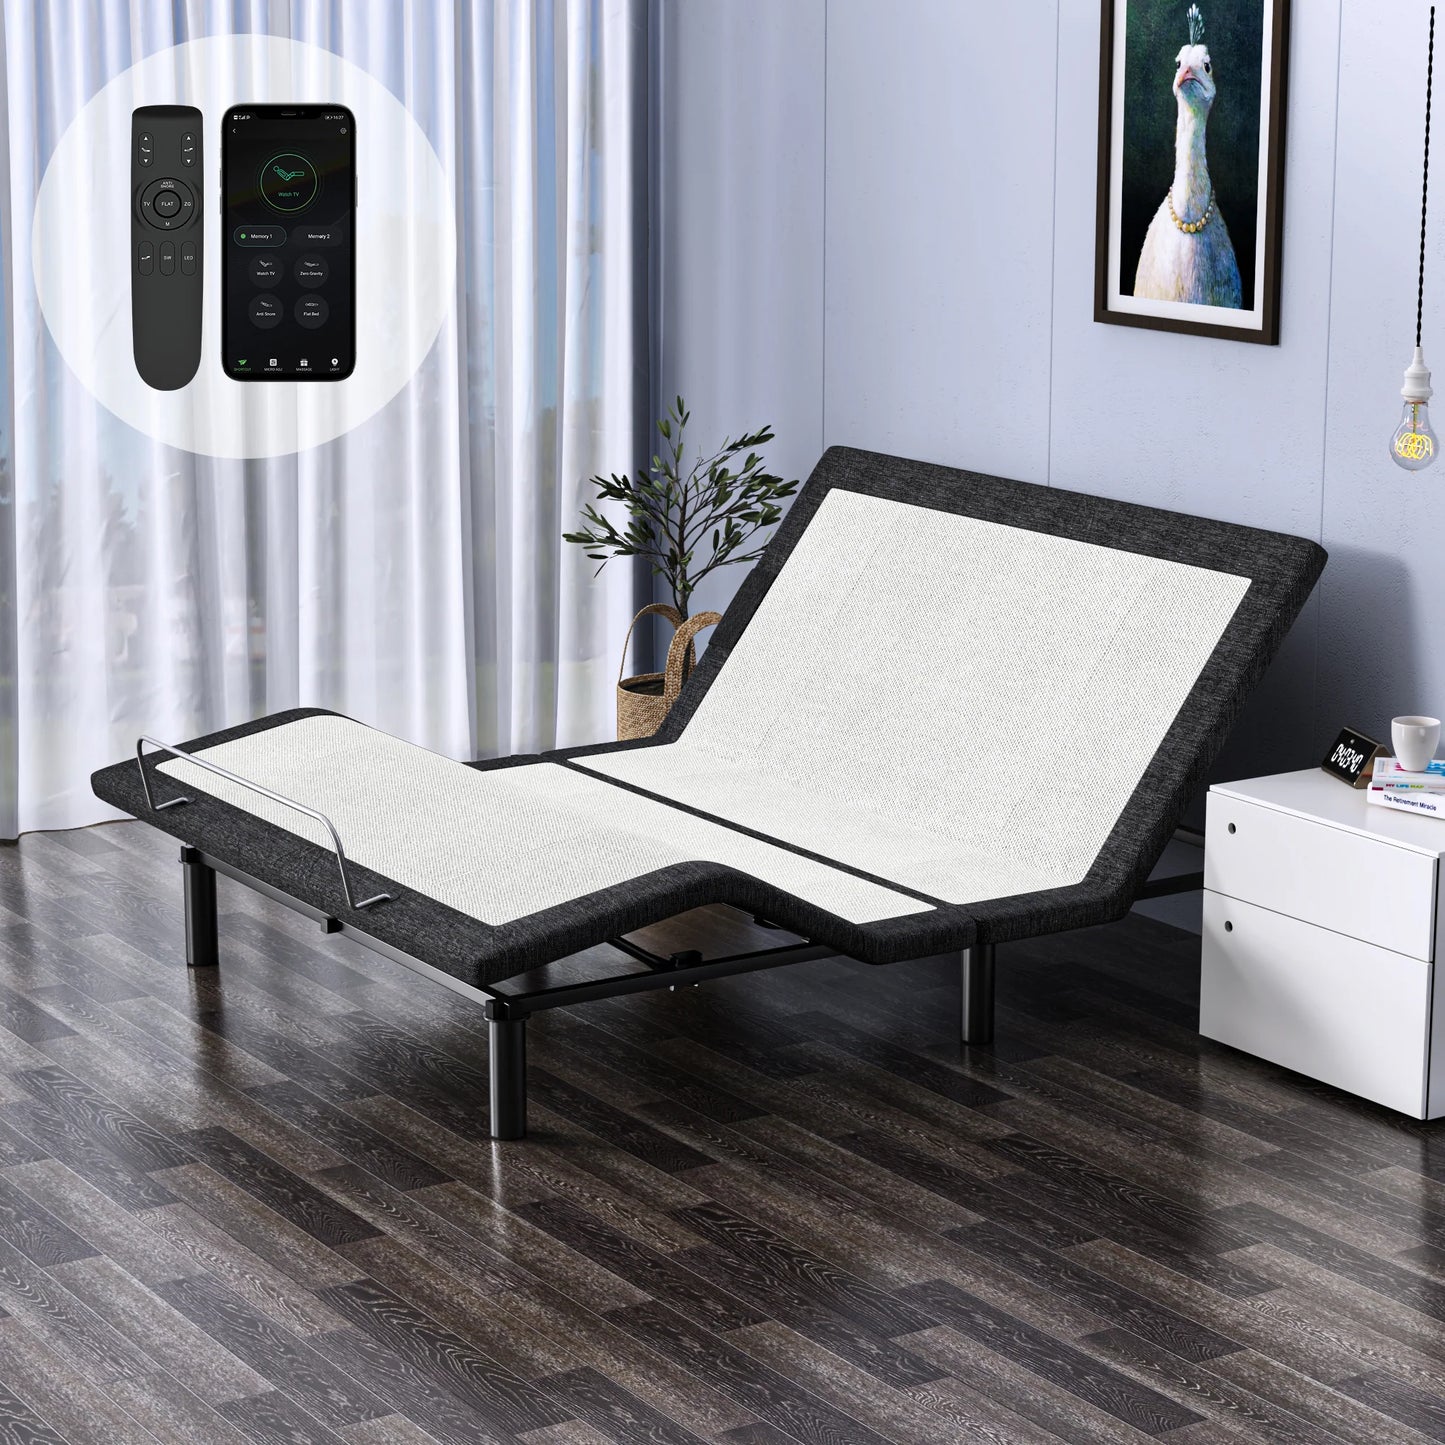 TACKspace Adjustable Bed Base with Dual Motors and Wireless Remote